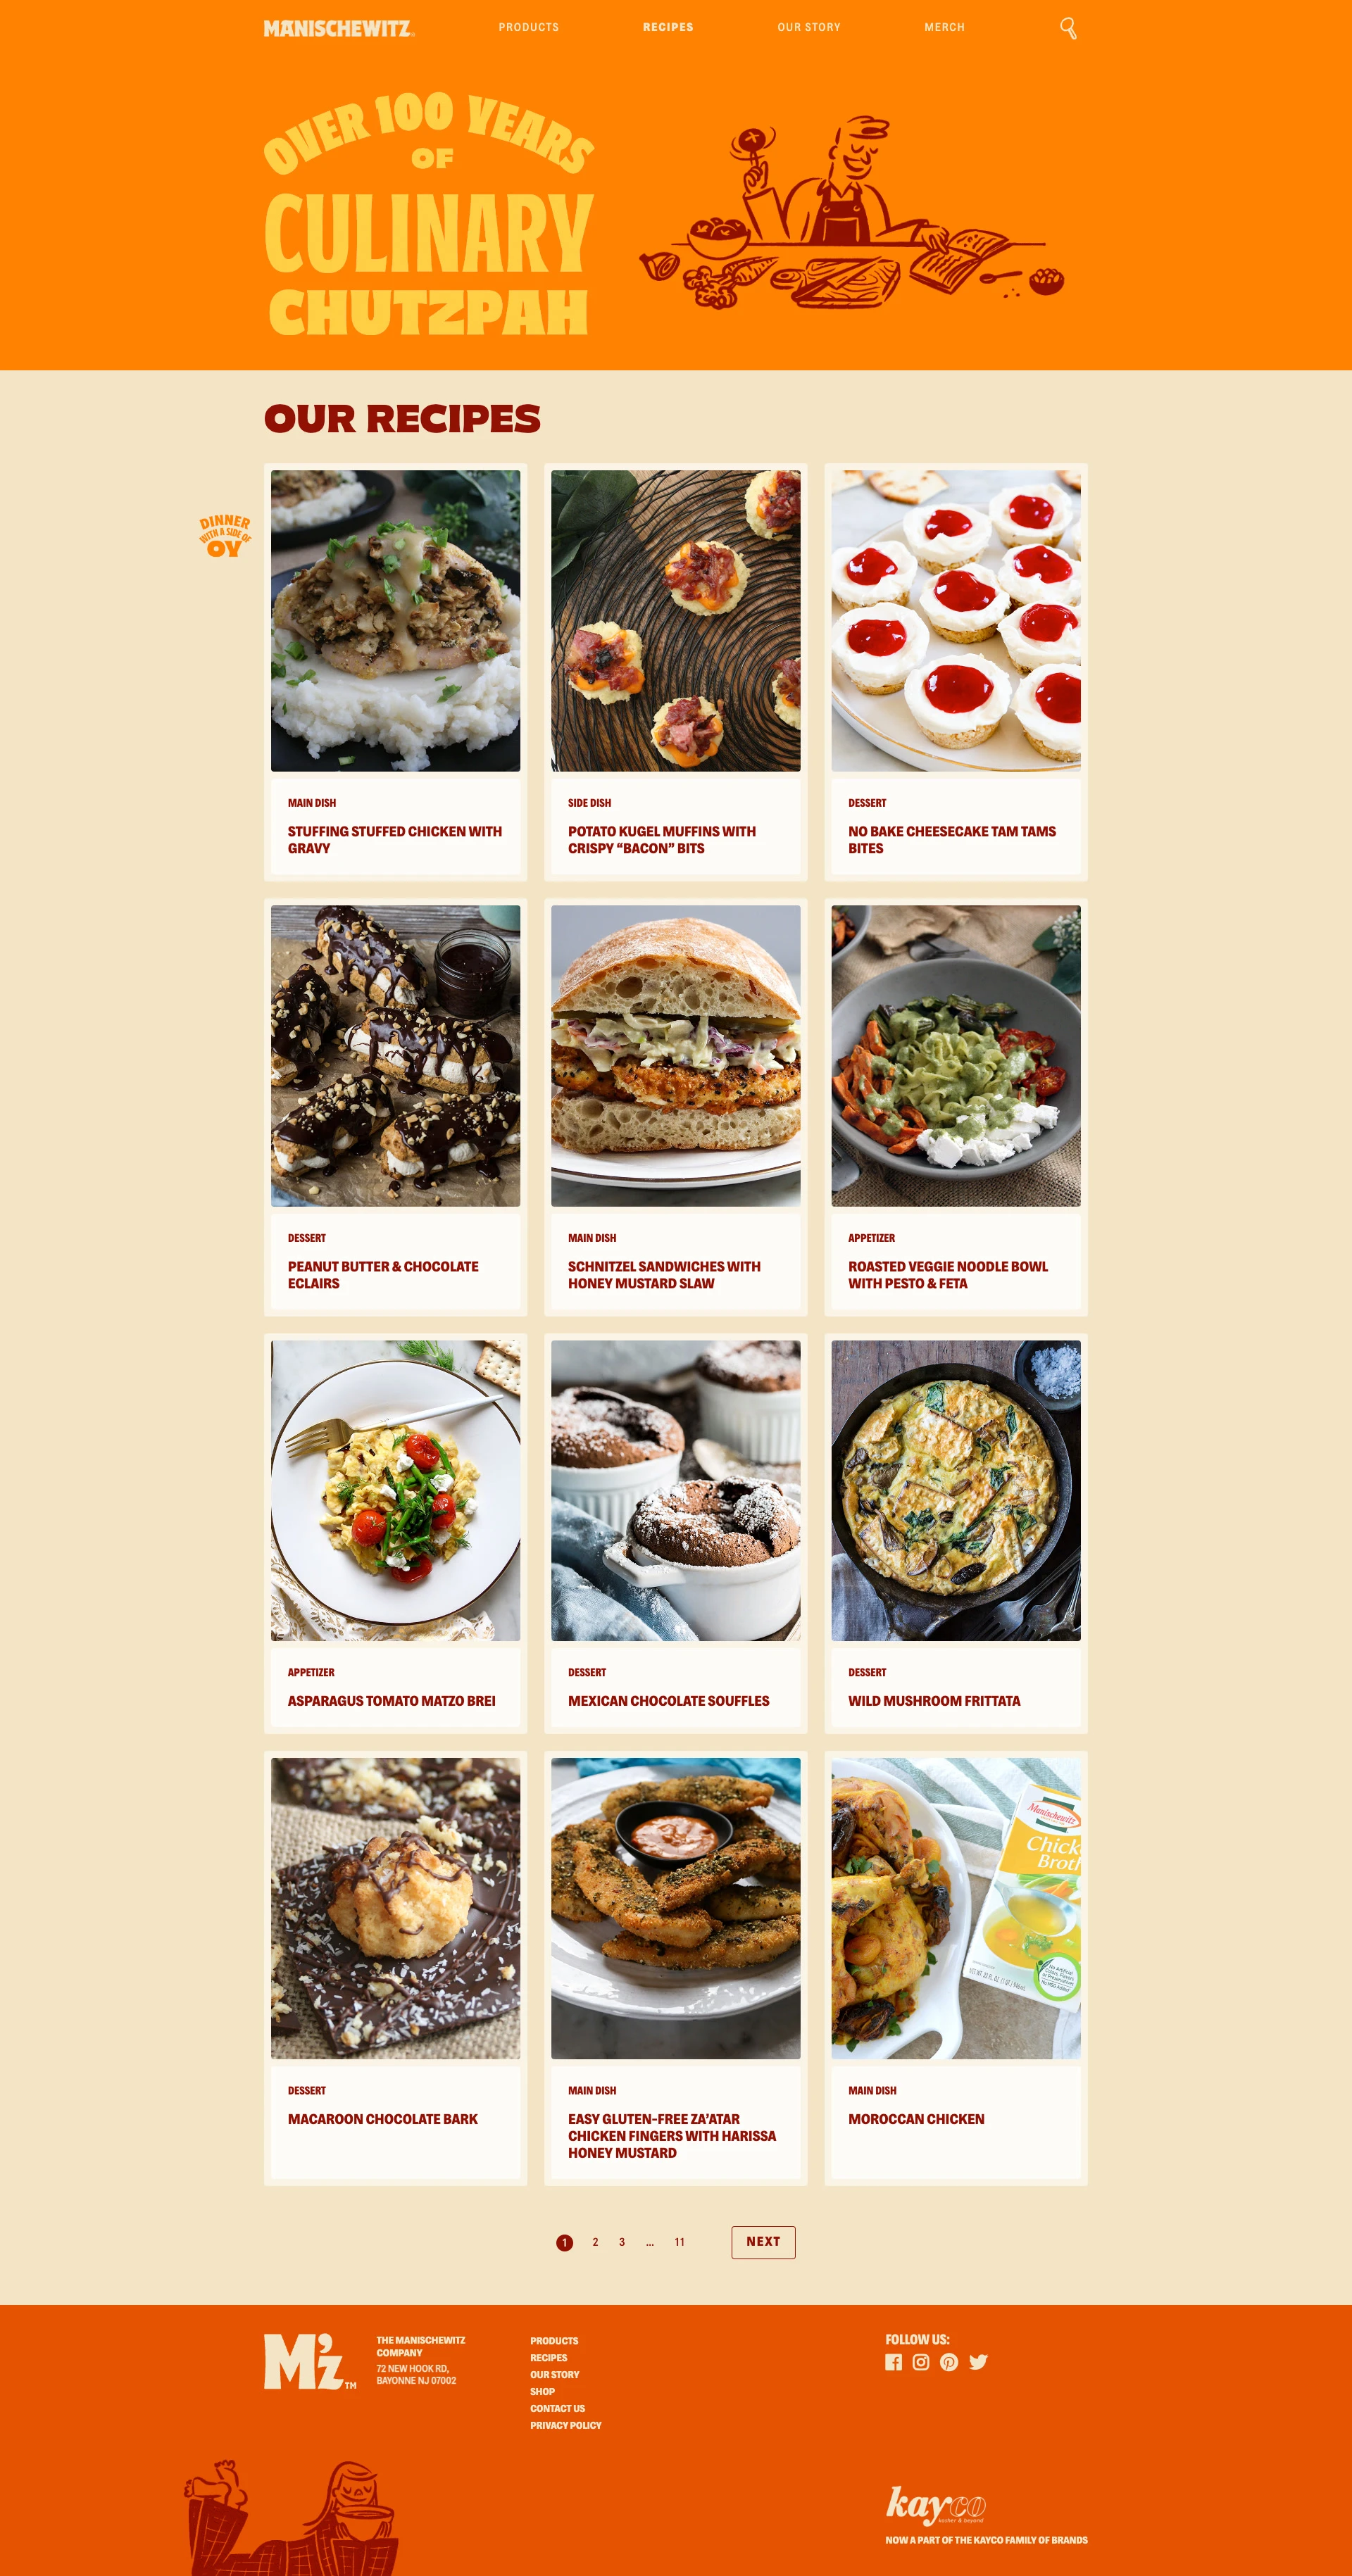 Manischewitz Landing Page Example: The Manischewitz Company has been making traditional Jewish foods since 1888, all going back to when Rabbi Dov Behr Manischewitz founded a small Matzo bakery in Cincinnati, Ohio. During that great age of American innovation, he tinkered away in his small bakery and discovered that the secret to machine matzo is square! That's how first entirely automated Kosher matzo production was born. Certified by an assembly of Rabbis from all over the world, they travelled from far and wide to witness Rabbi Manischewitz’s marvelous matzo making machine.